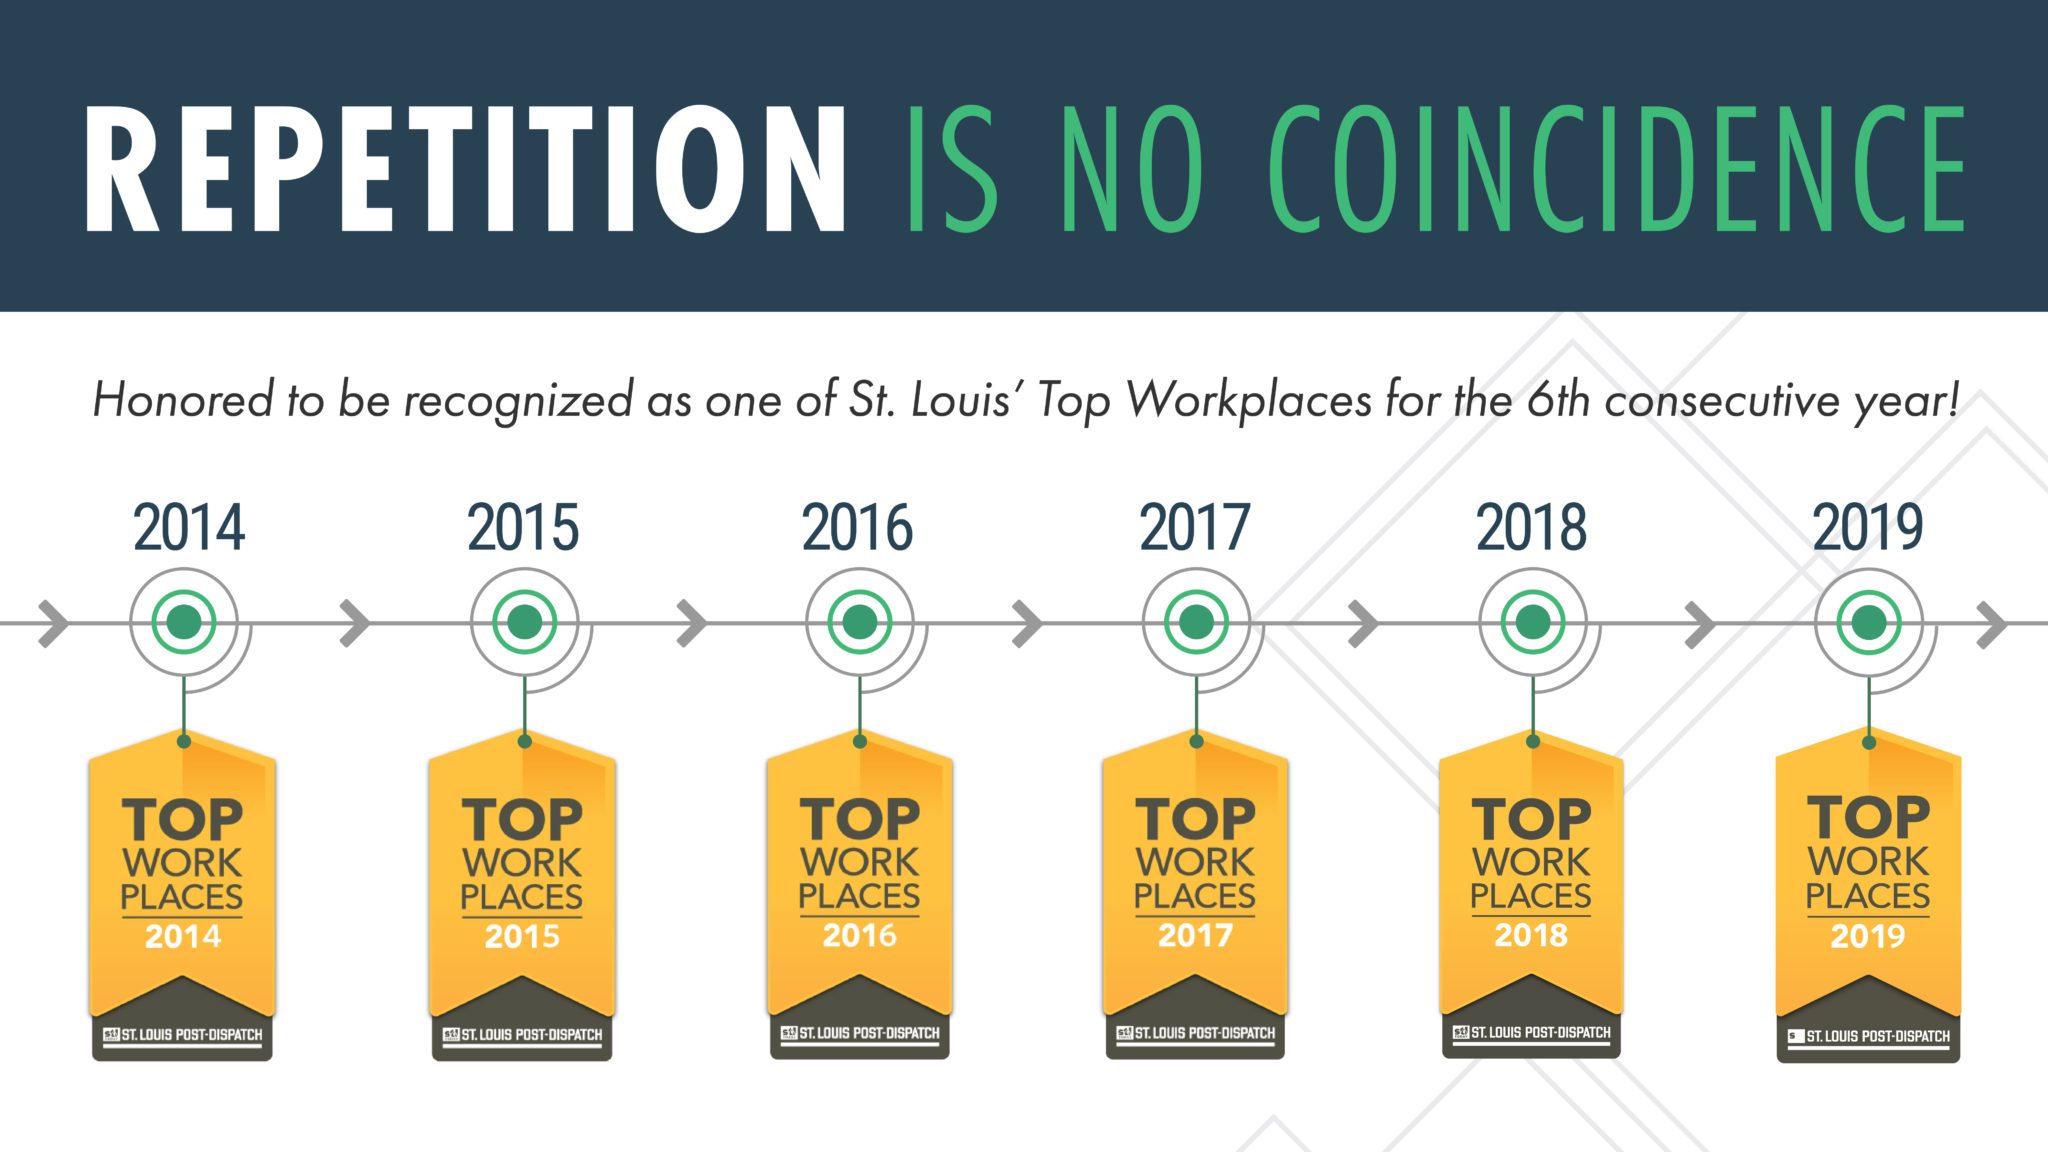 Moneta ranks as a Top Workplace in St. Louis for sixth straight year